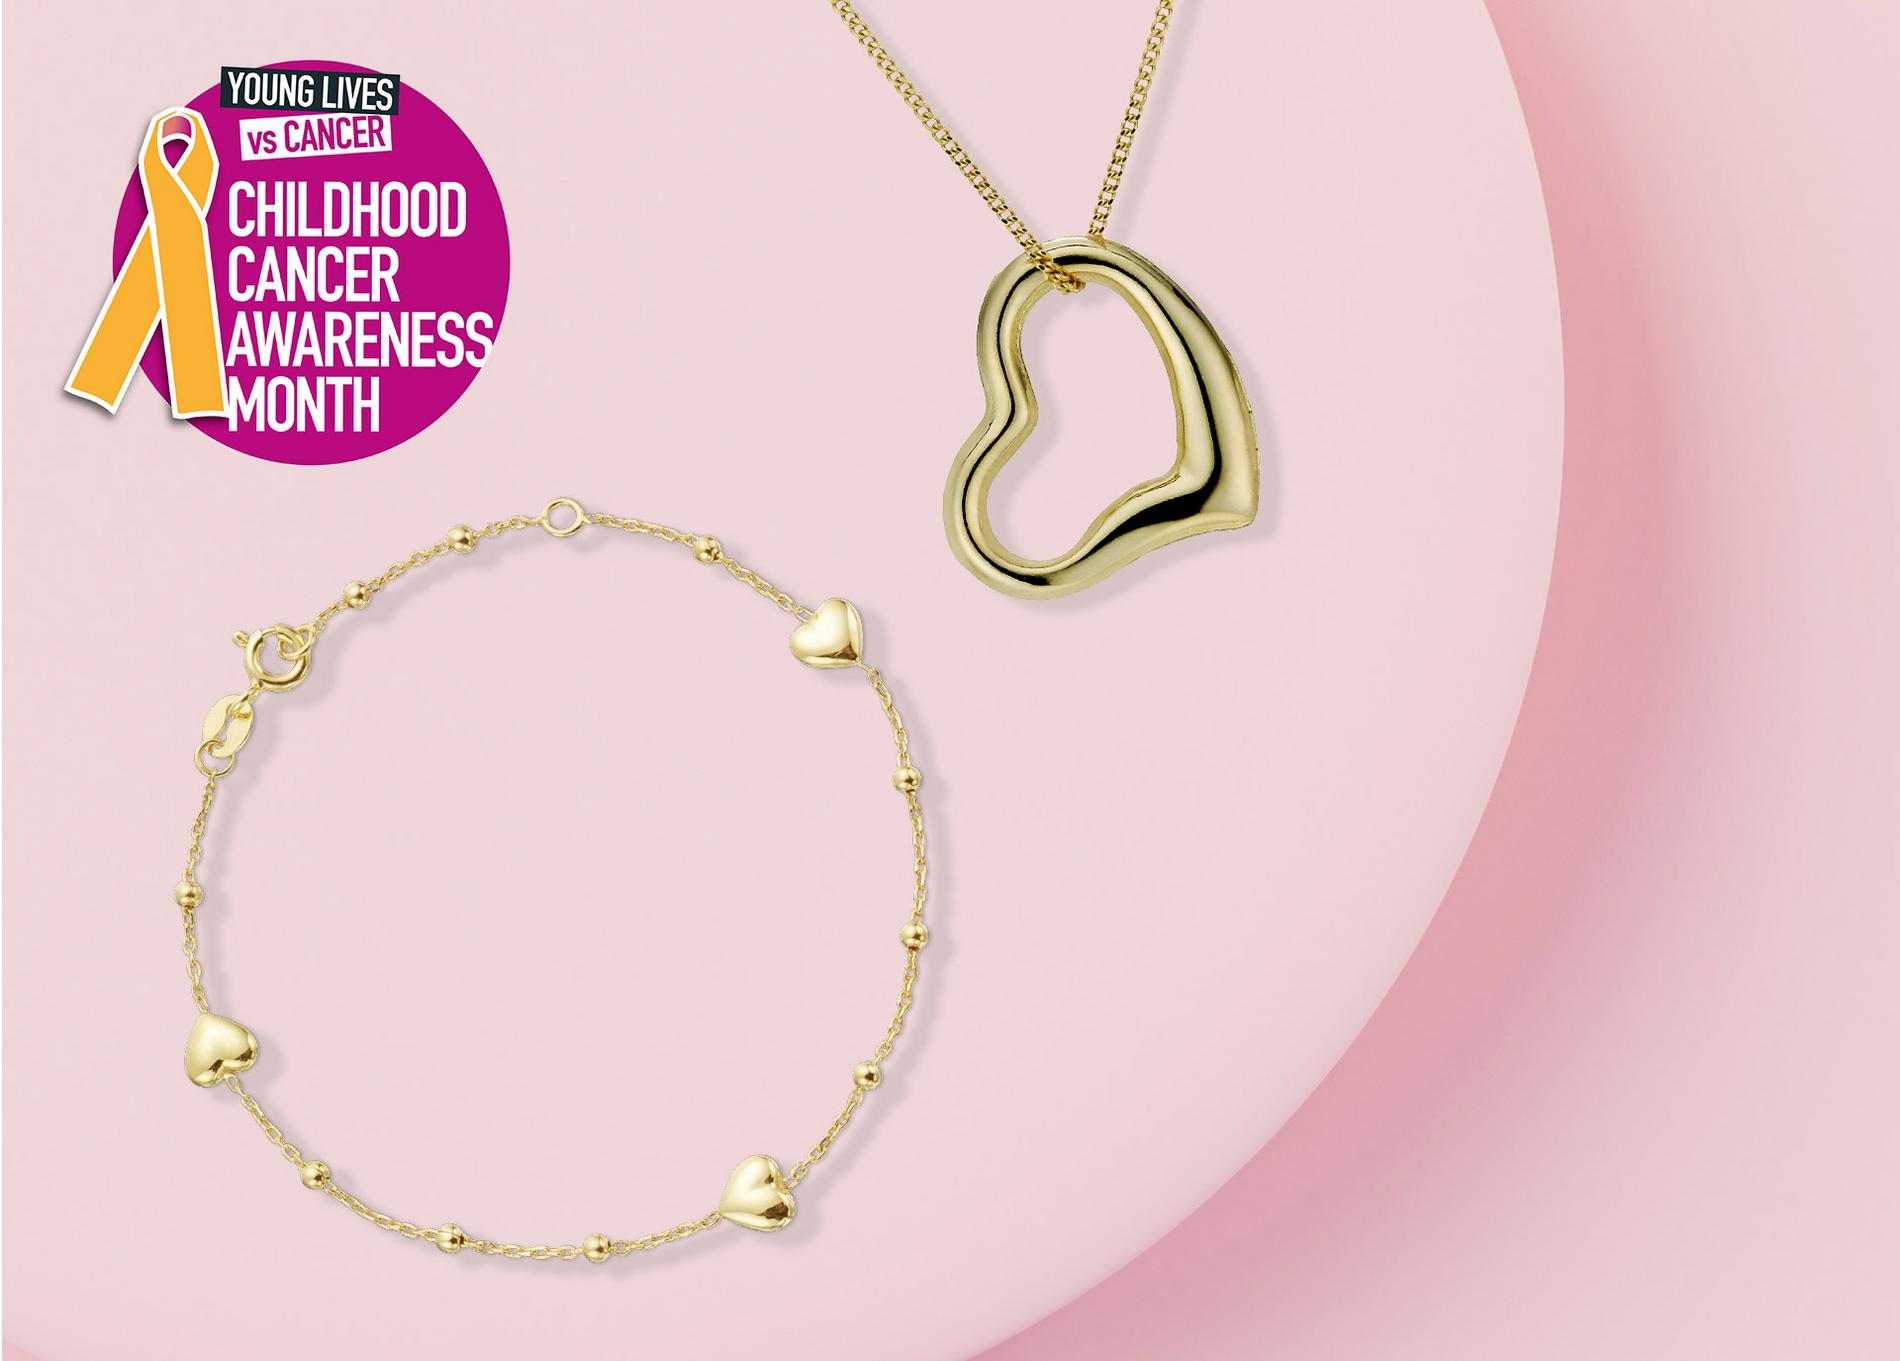 Young Lives vs Cancer gold jewellery